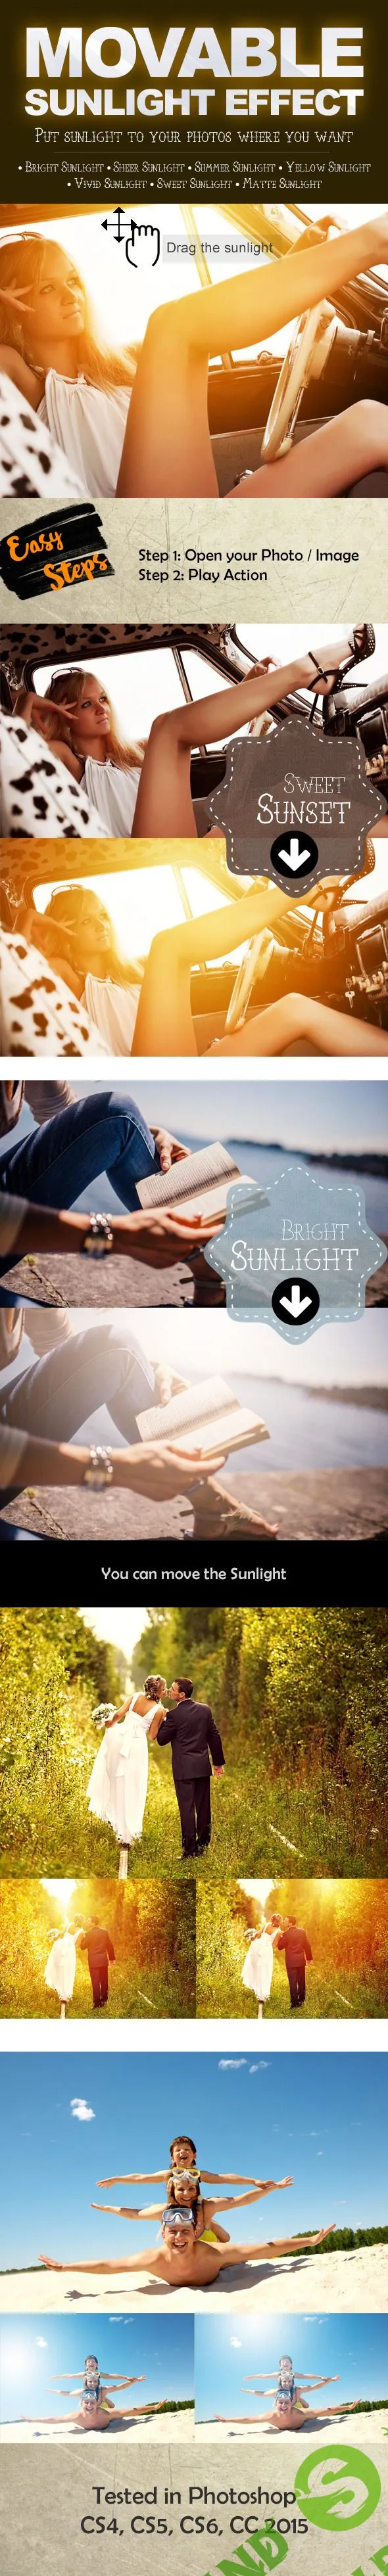 [GraphicRiver] Movable Sunlight Effects Photoshop Actions